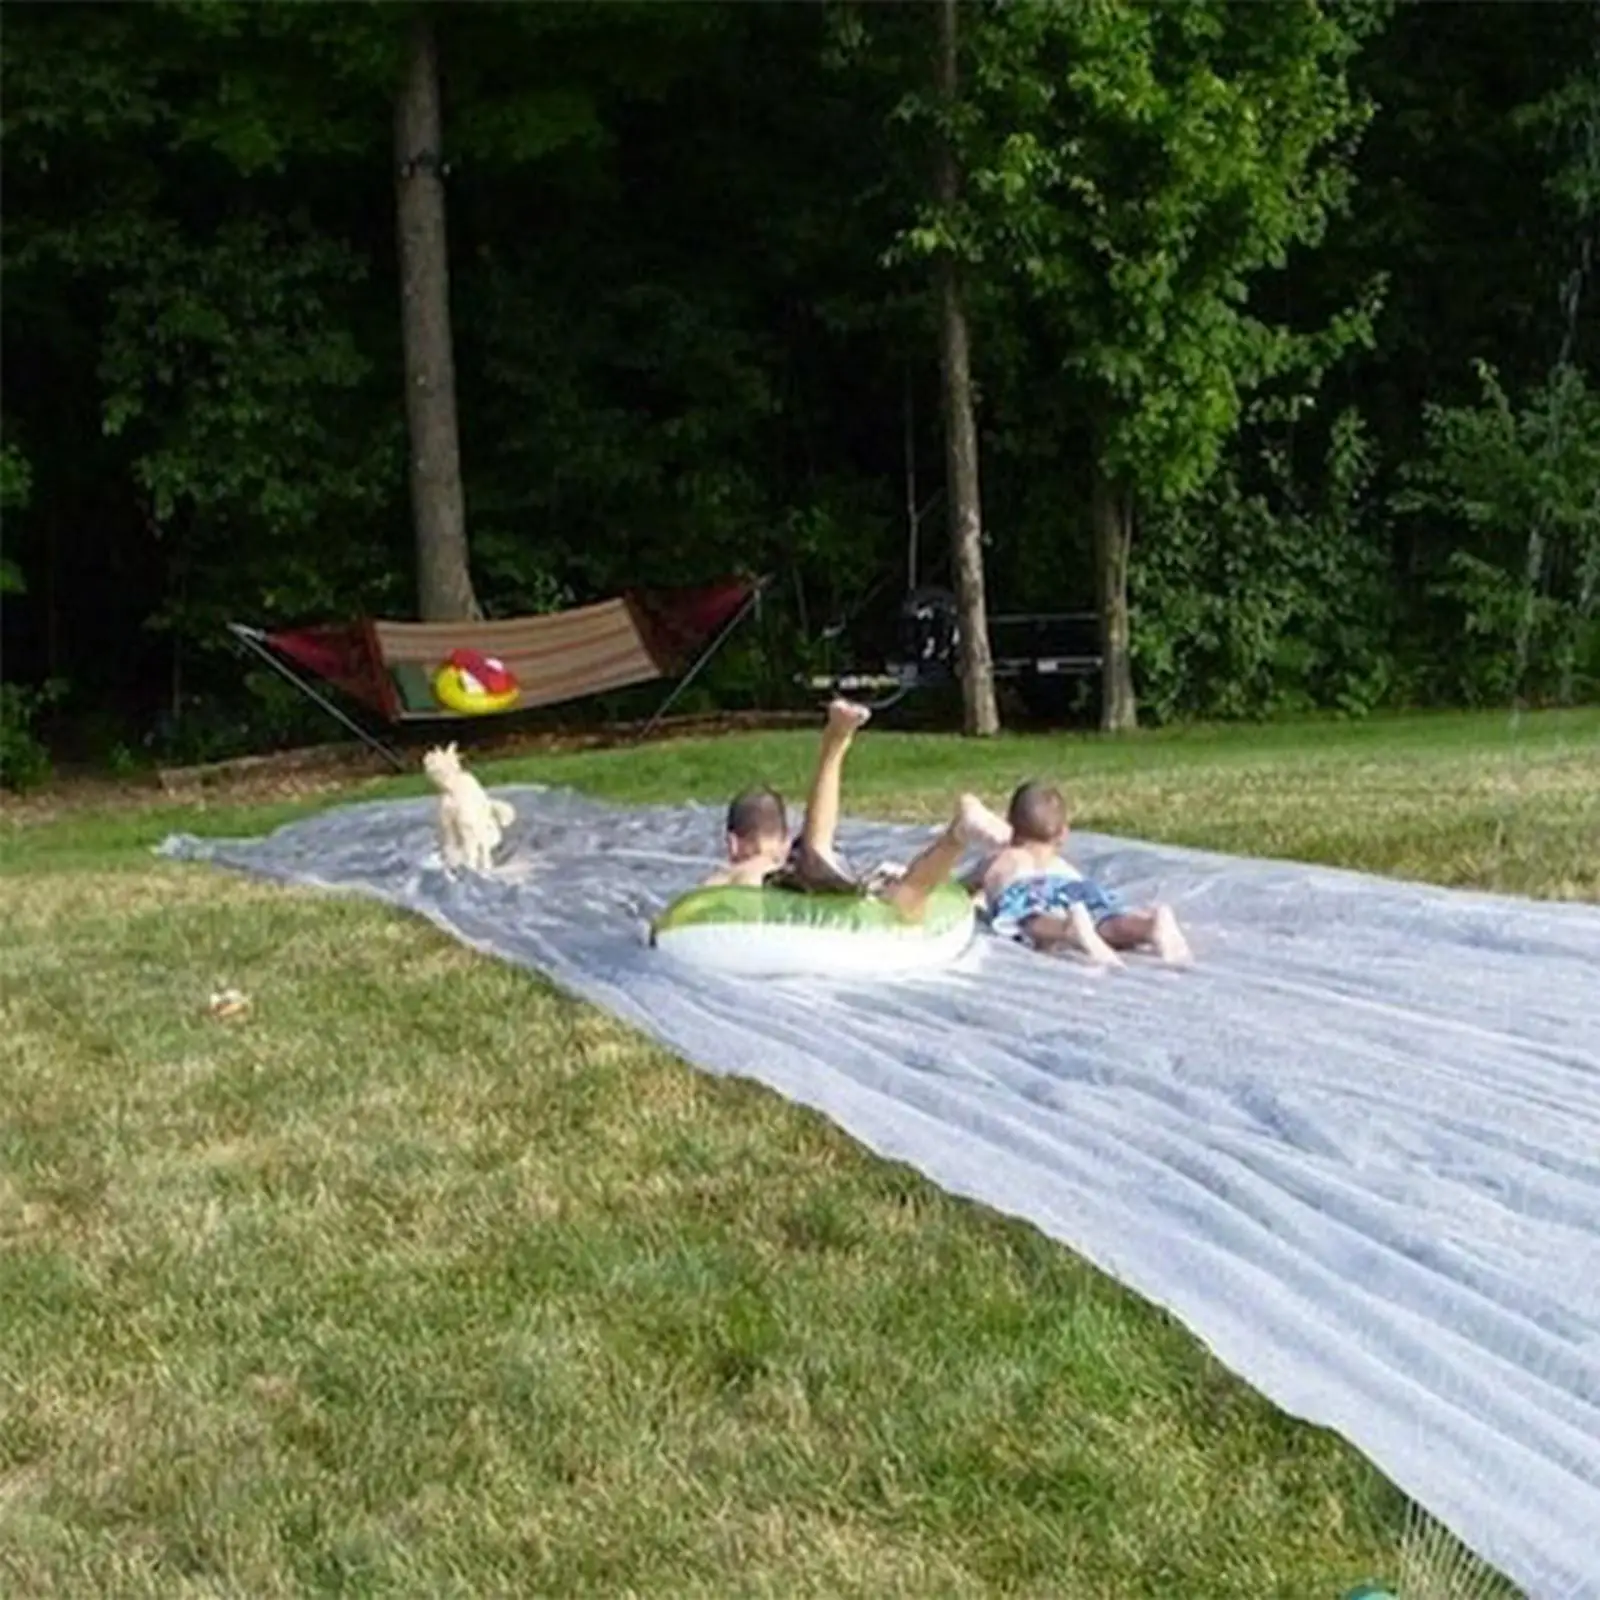 4 Meter Lawn Water Slide Sheeting Extra Thick  Slip Pad Backyard Activity for Children Boys Kids Girls Adults